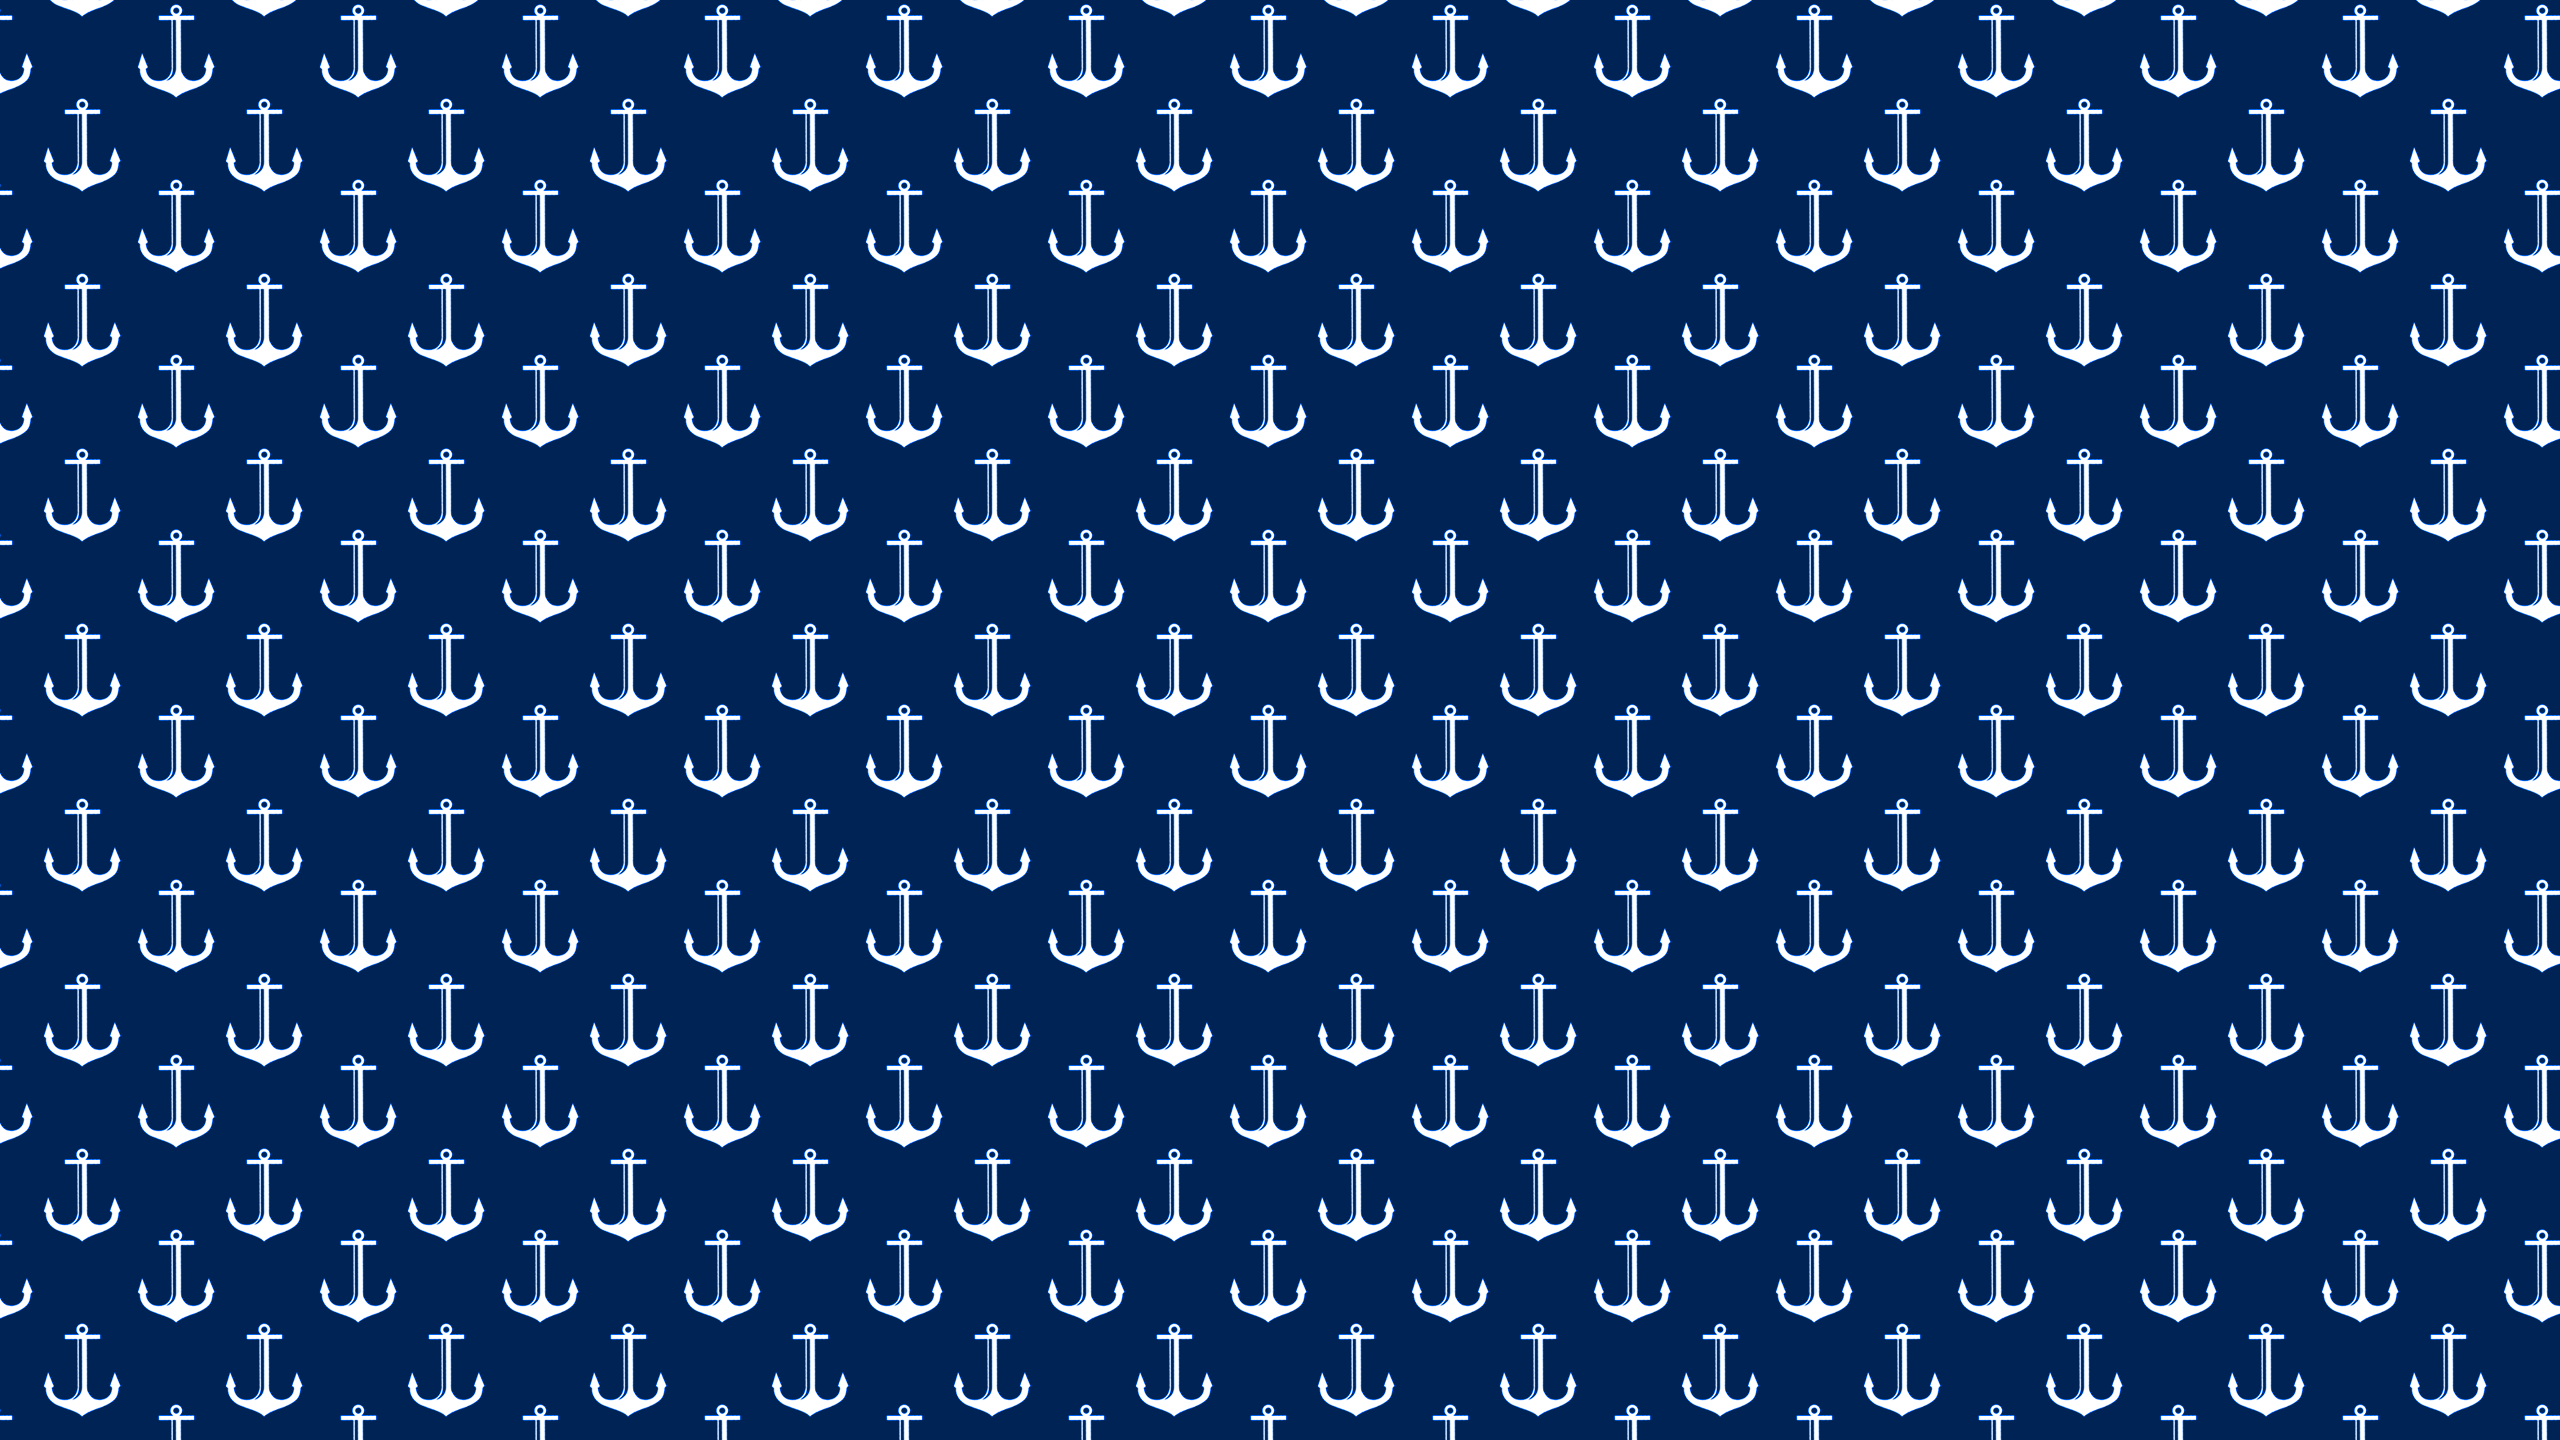 Navy Blue Anchors Desktop Wallpaper is easy Just save the wallpaper